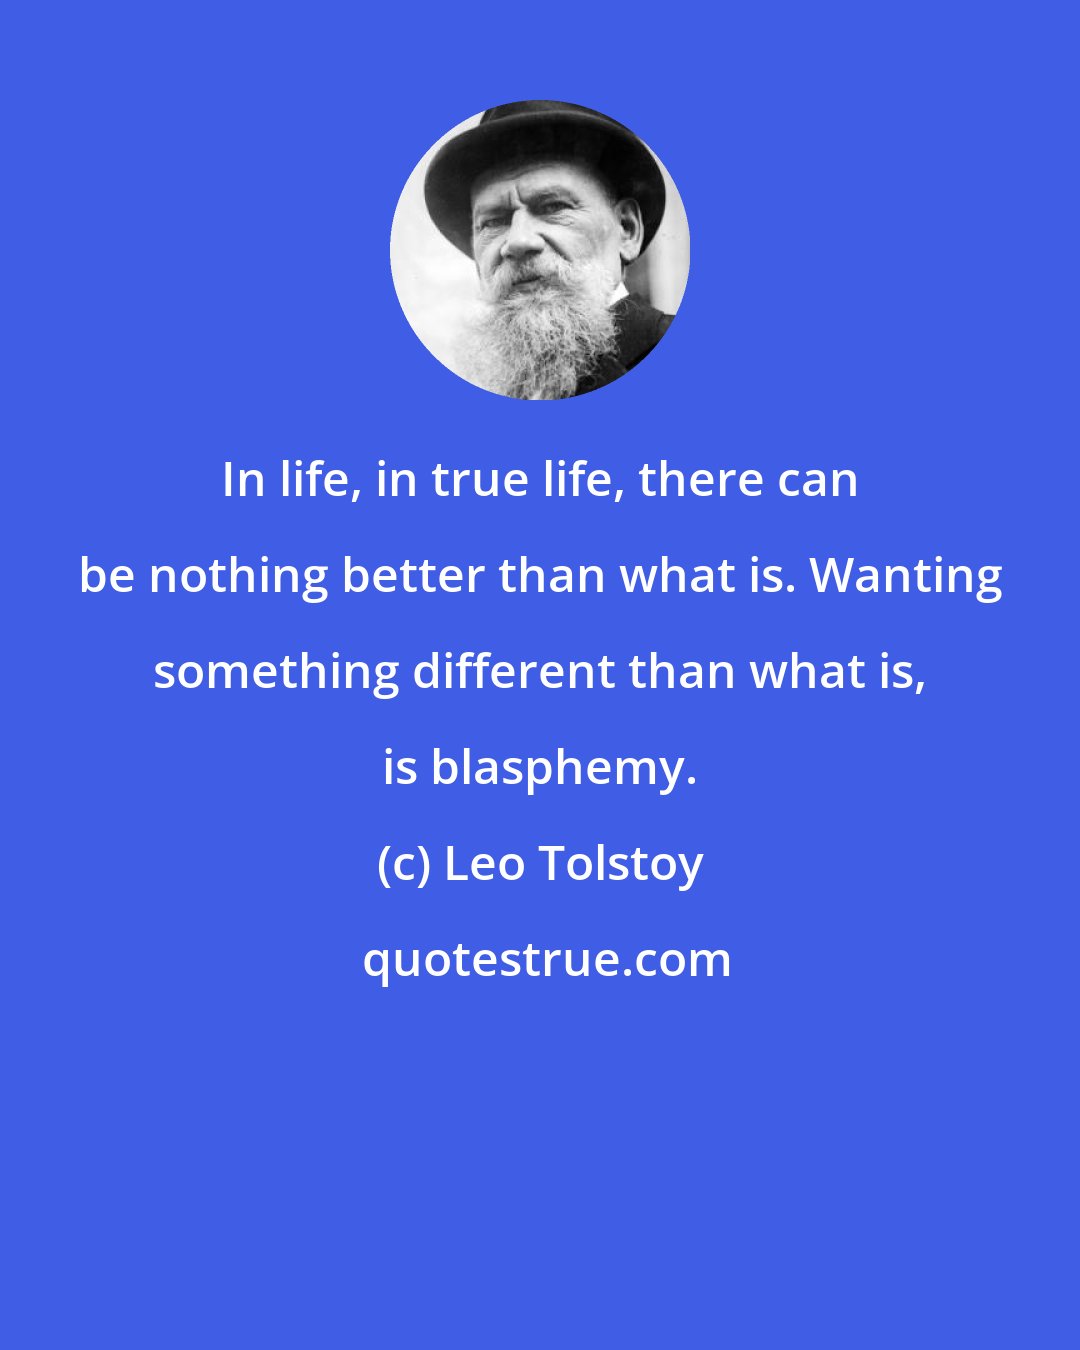 Leo Tolstoy: In life, in true life, there can be nothing better than what is. Wanting something different than what is, is blasphemy.